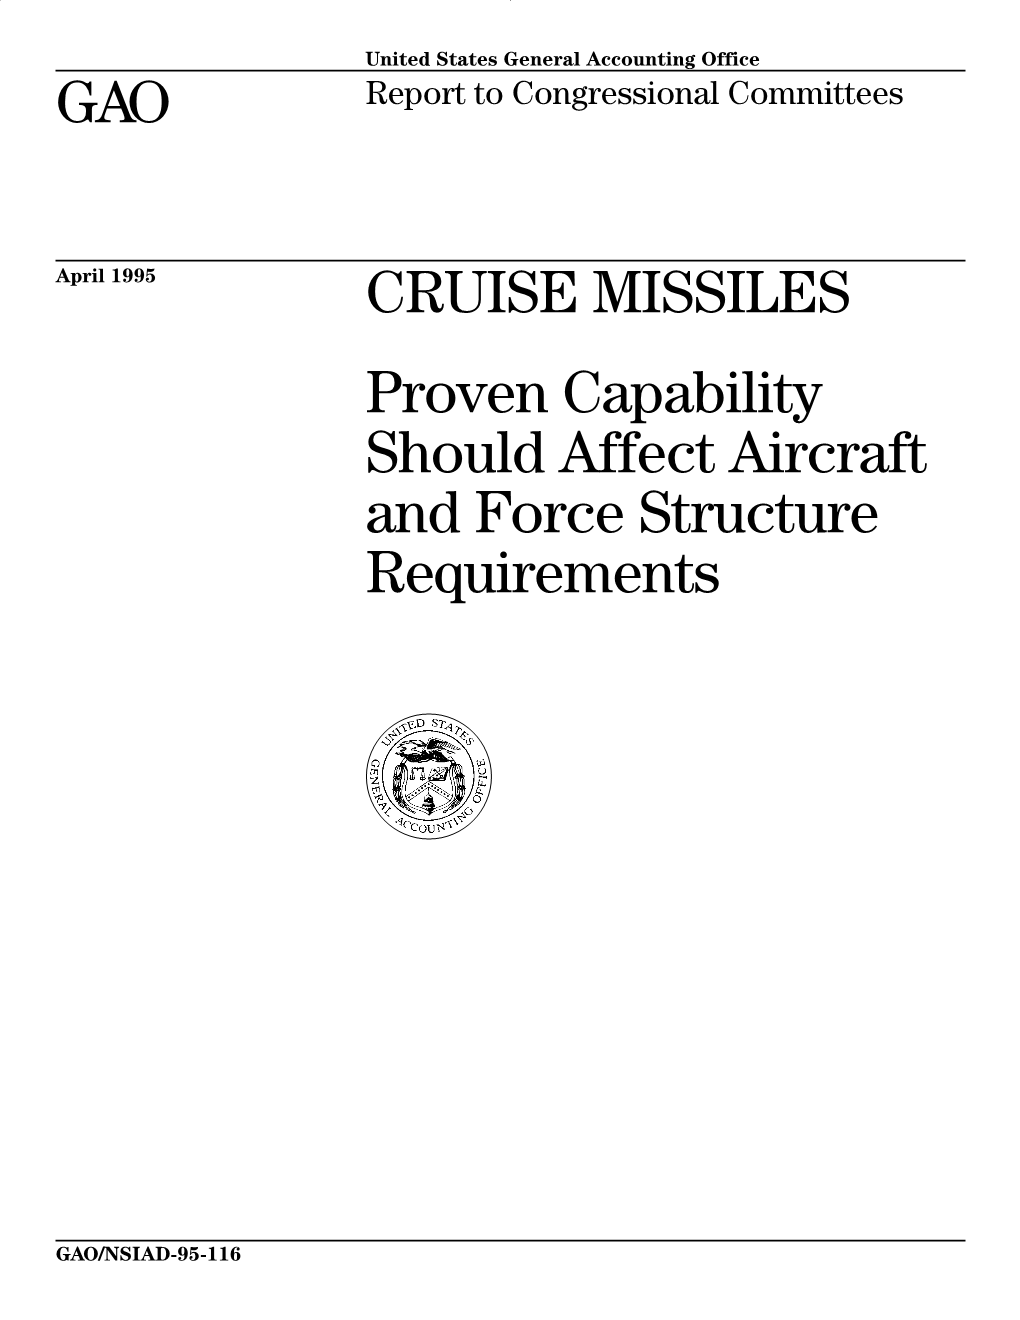 GAO CRUISE MISSILES Proven Capability Should Affect Aircraft And